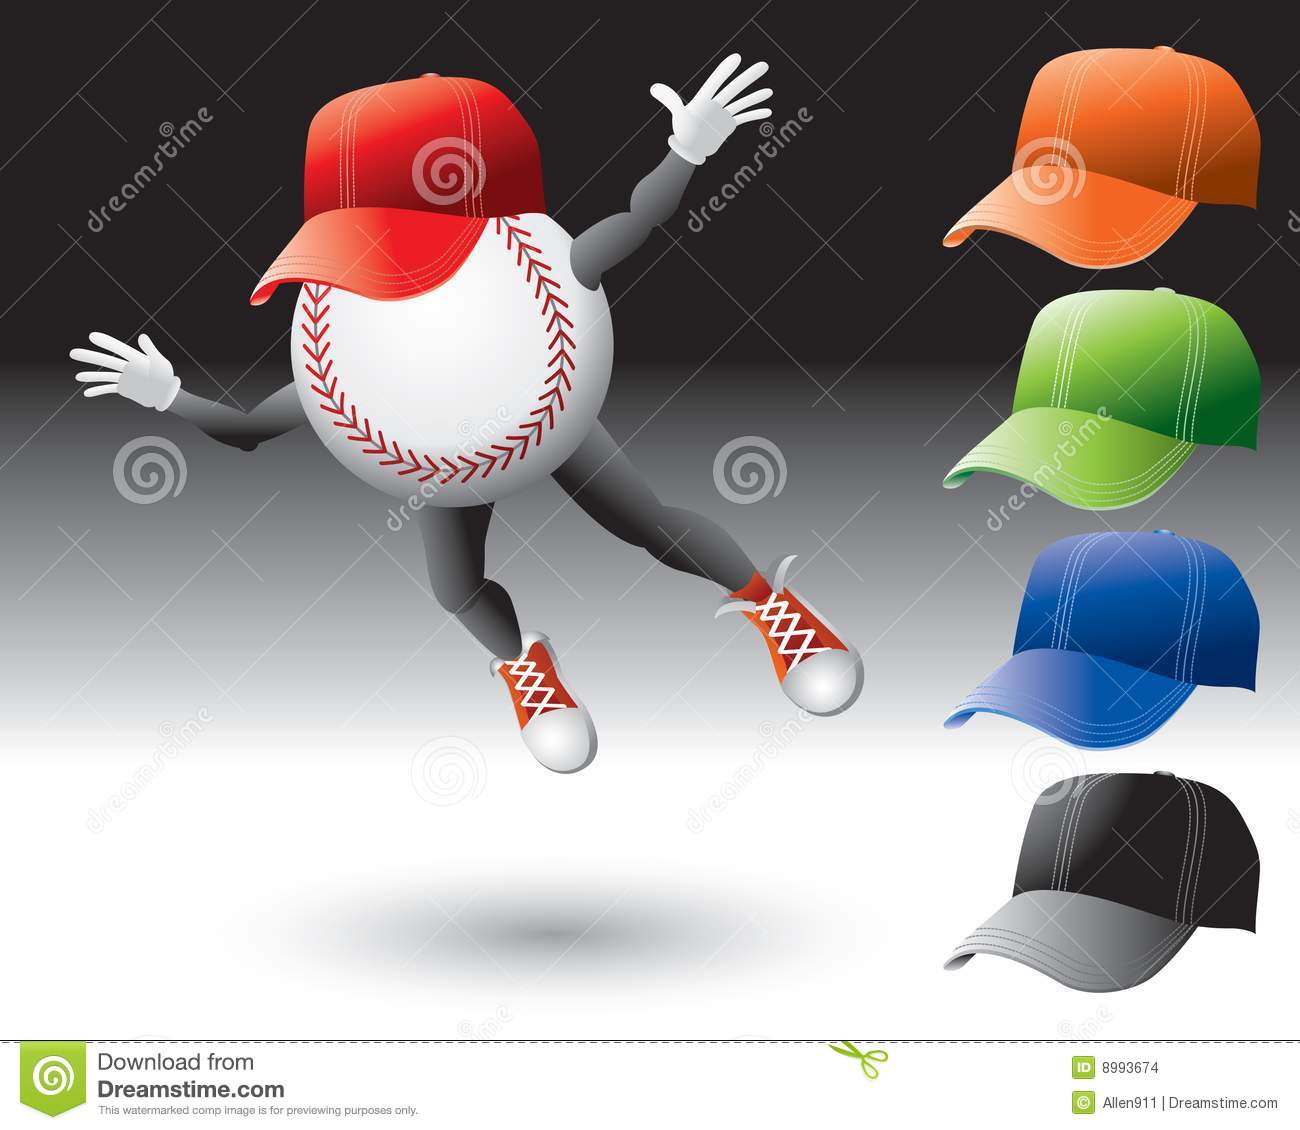 Baseball Character With Hats Stock Images   Image  8993674